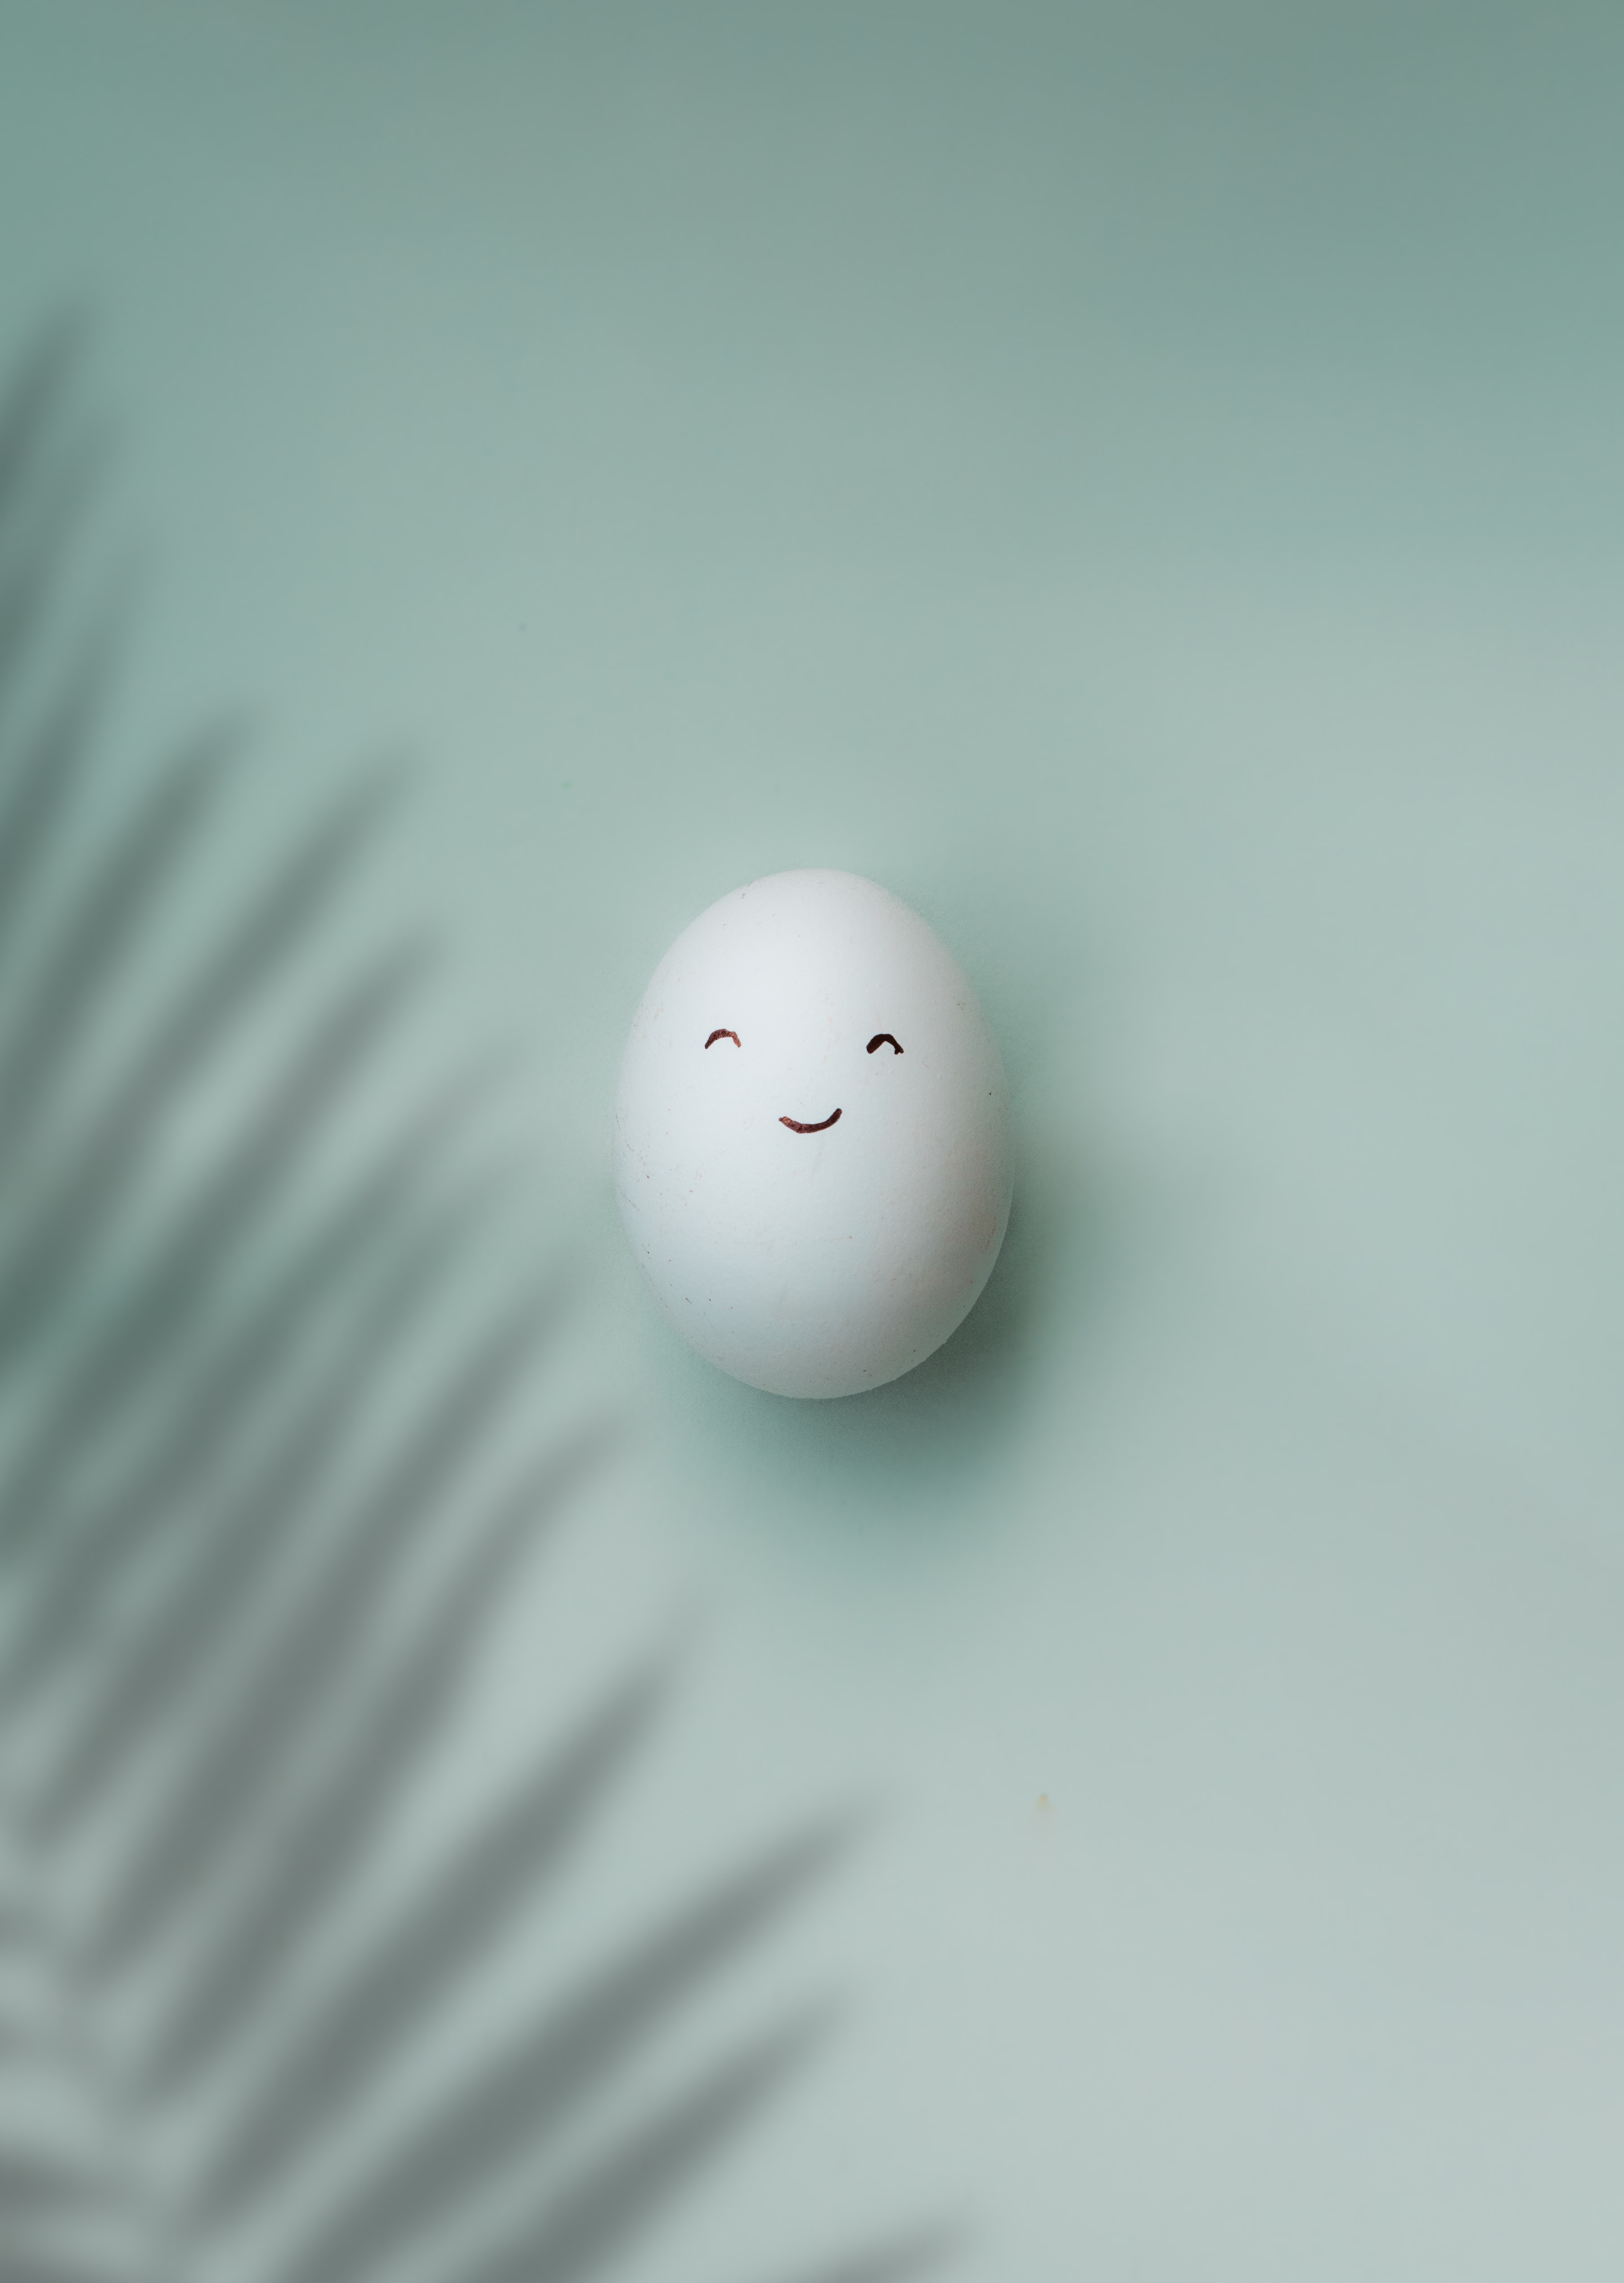 53660 Screensavers and Wallpapers Smiley for phone. Download white, minimalism, smile, emoticon, smiley, egg pictures for free